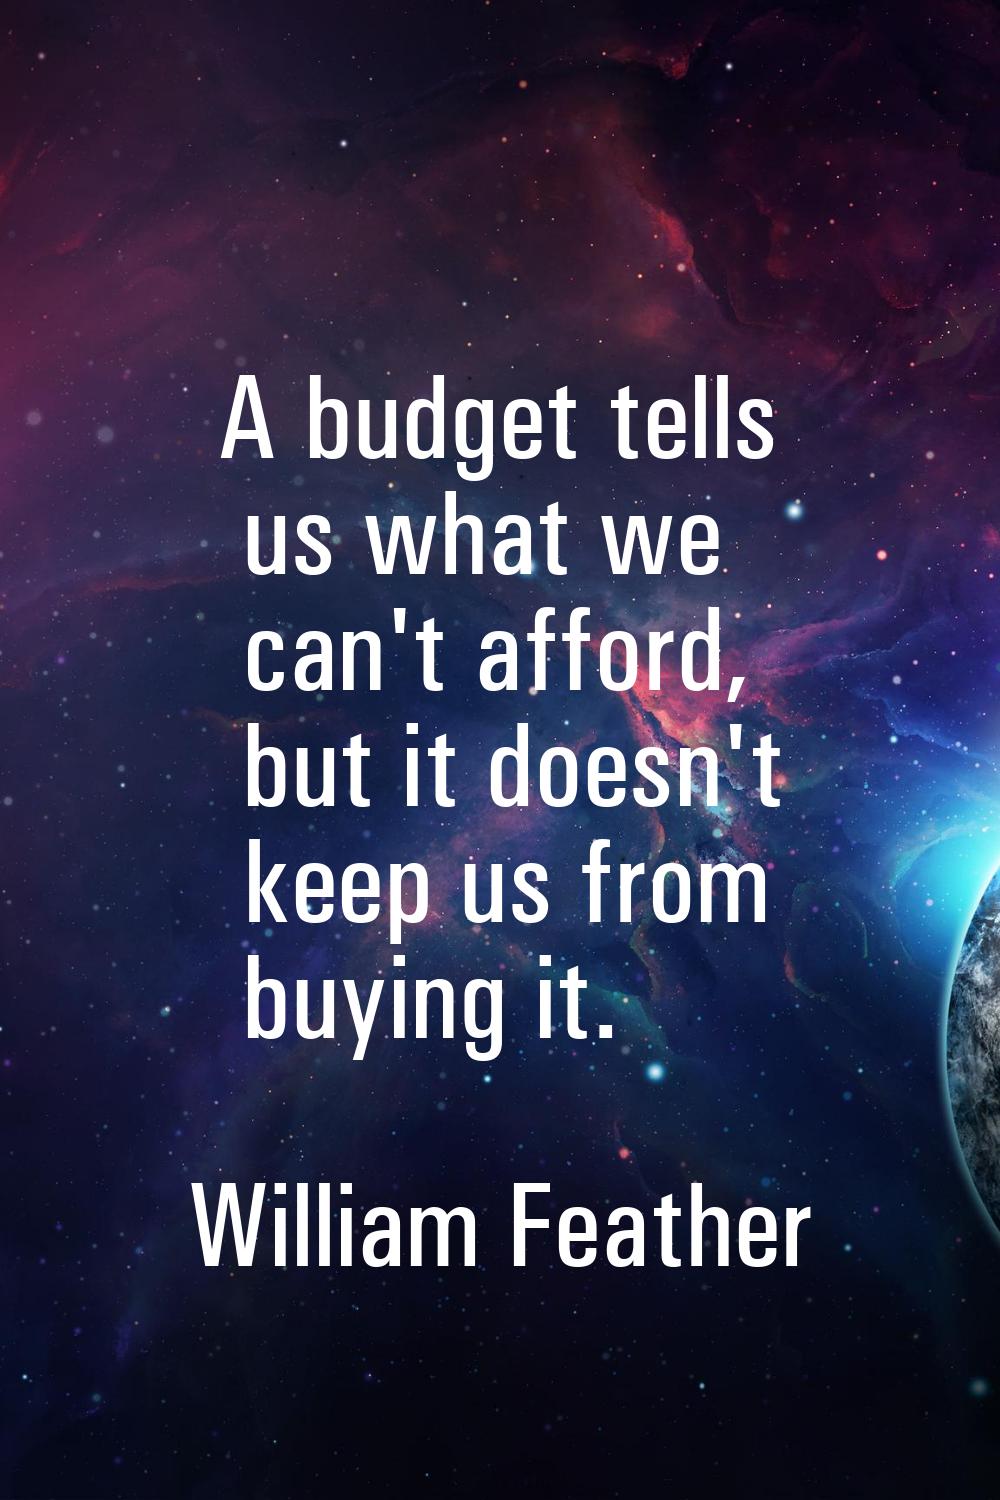 A budget tells us what we can't afford, but it doesn't keep us from buying it.